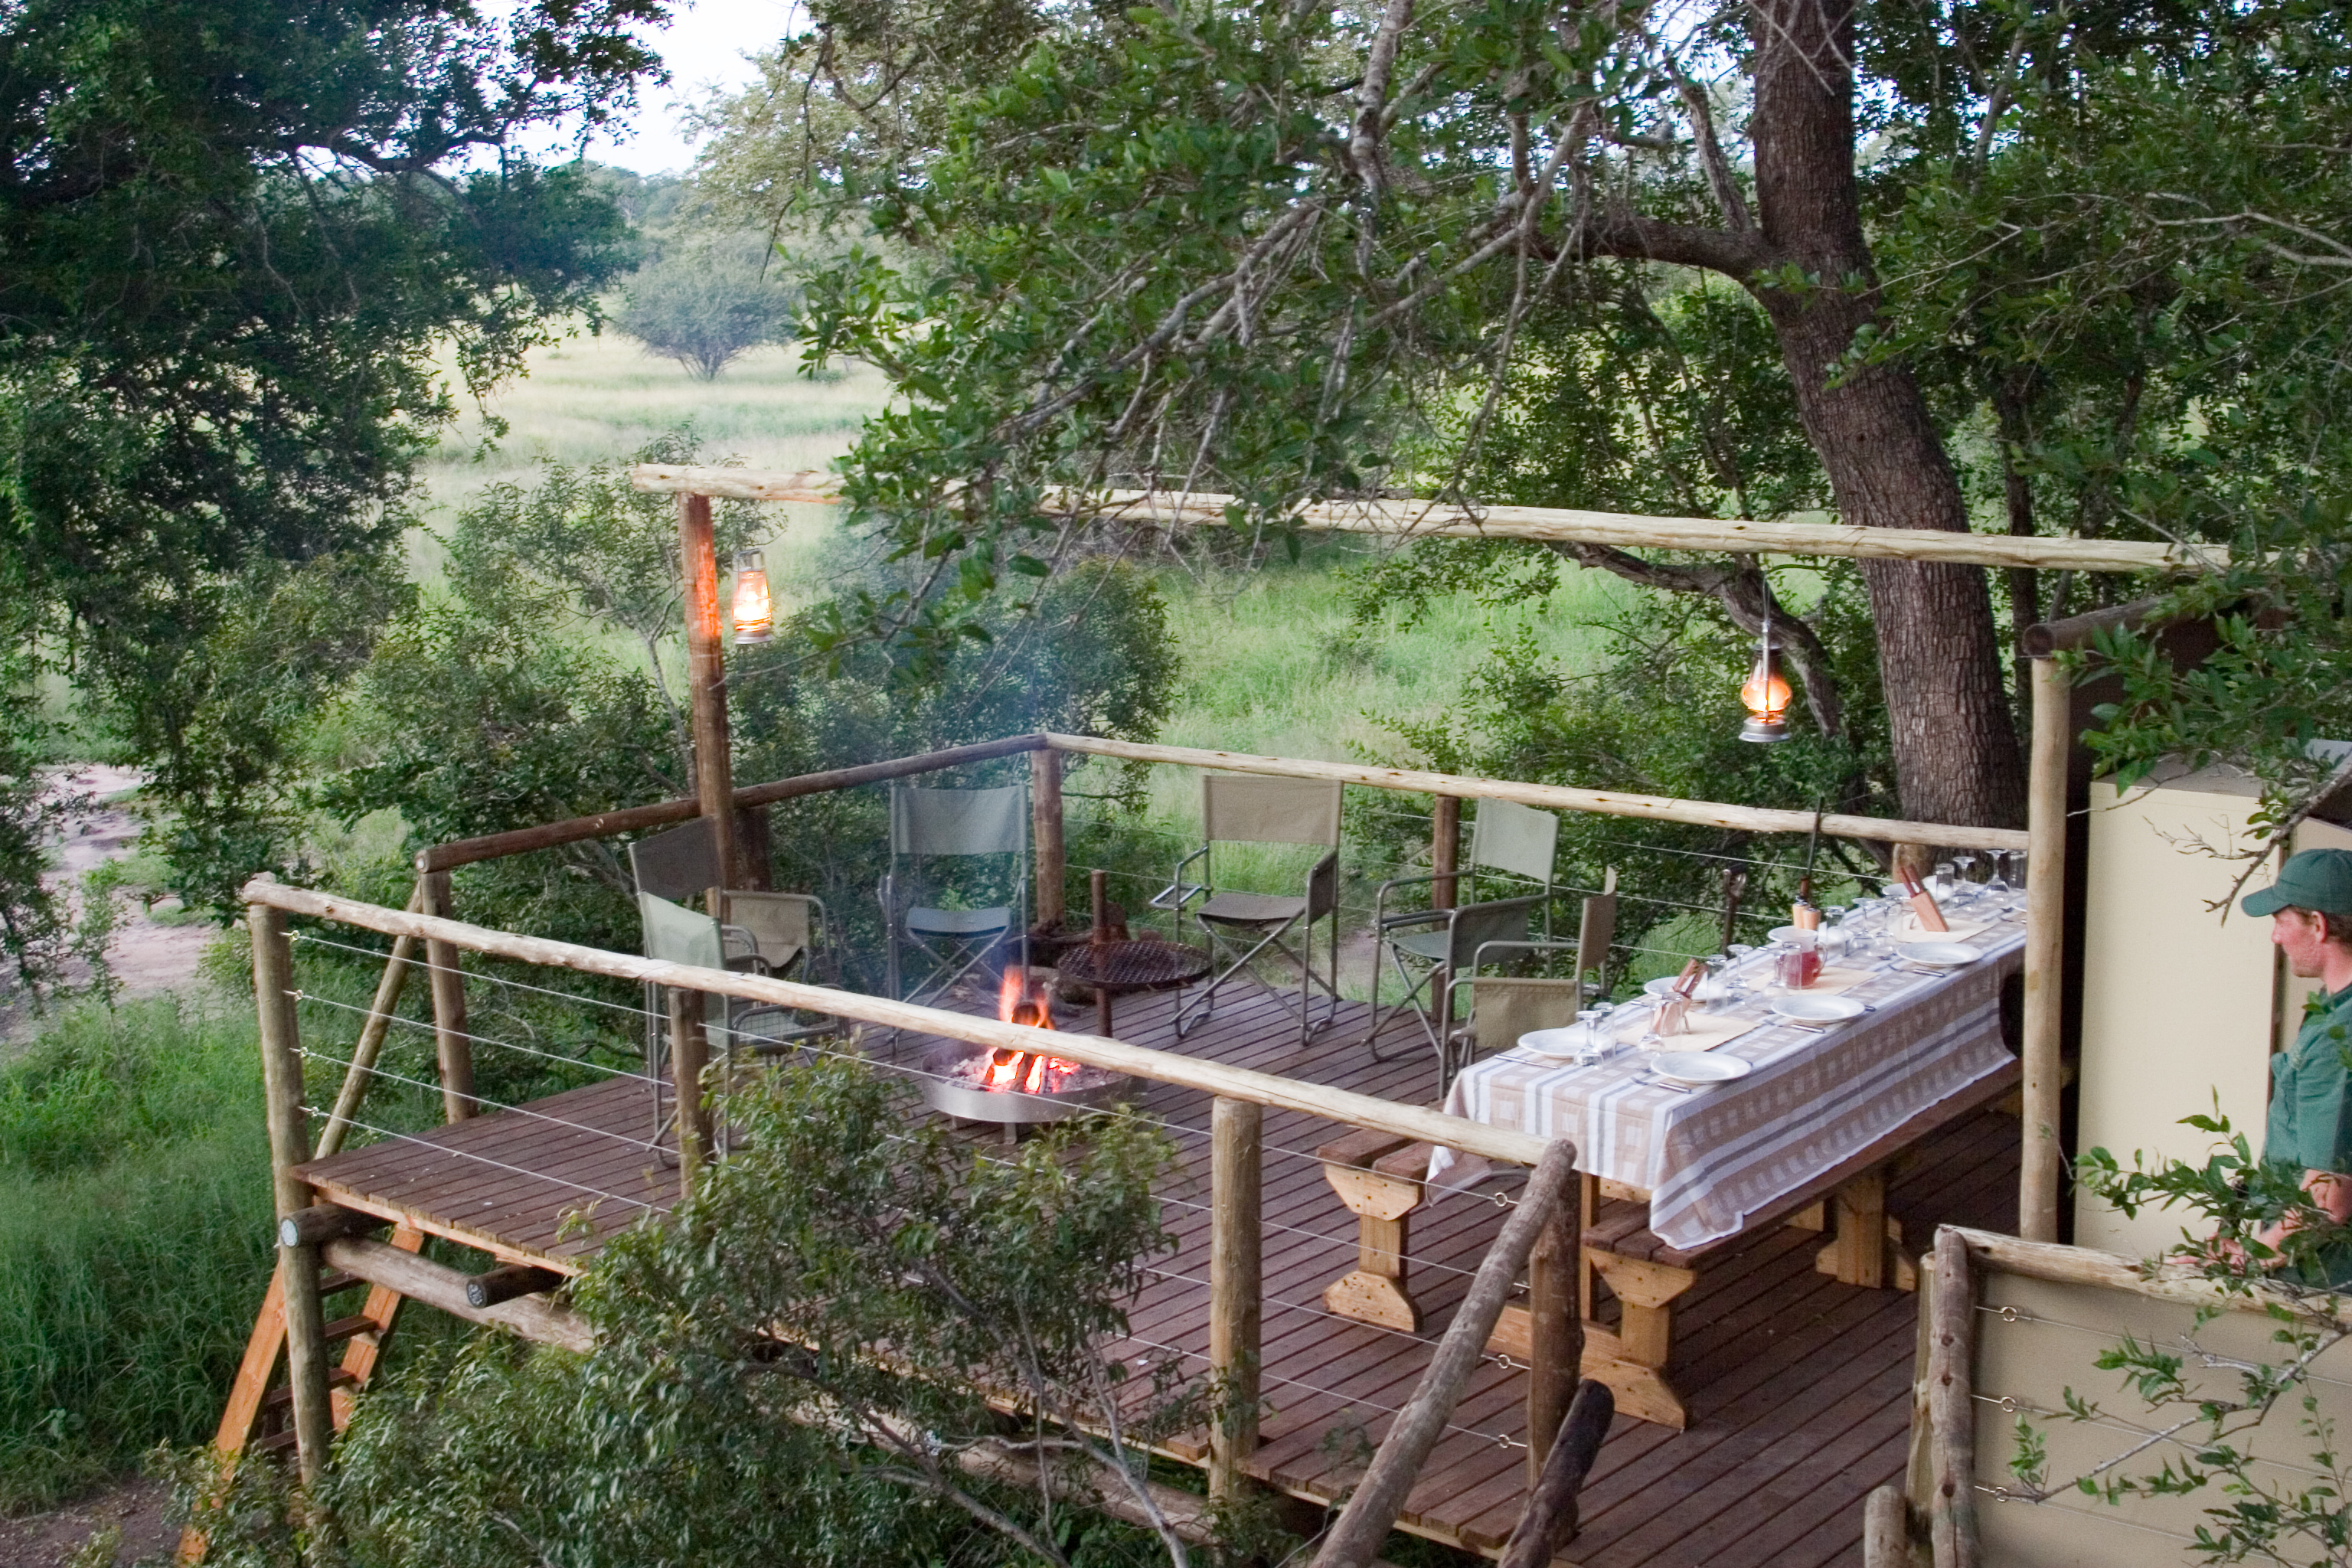 Sleepout dining from Rhino Walking Safaris in Kruger National Park